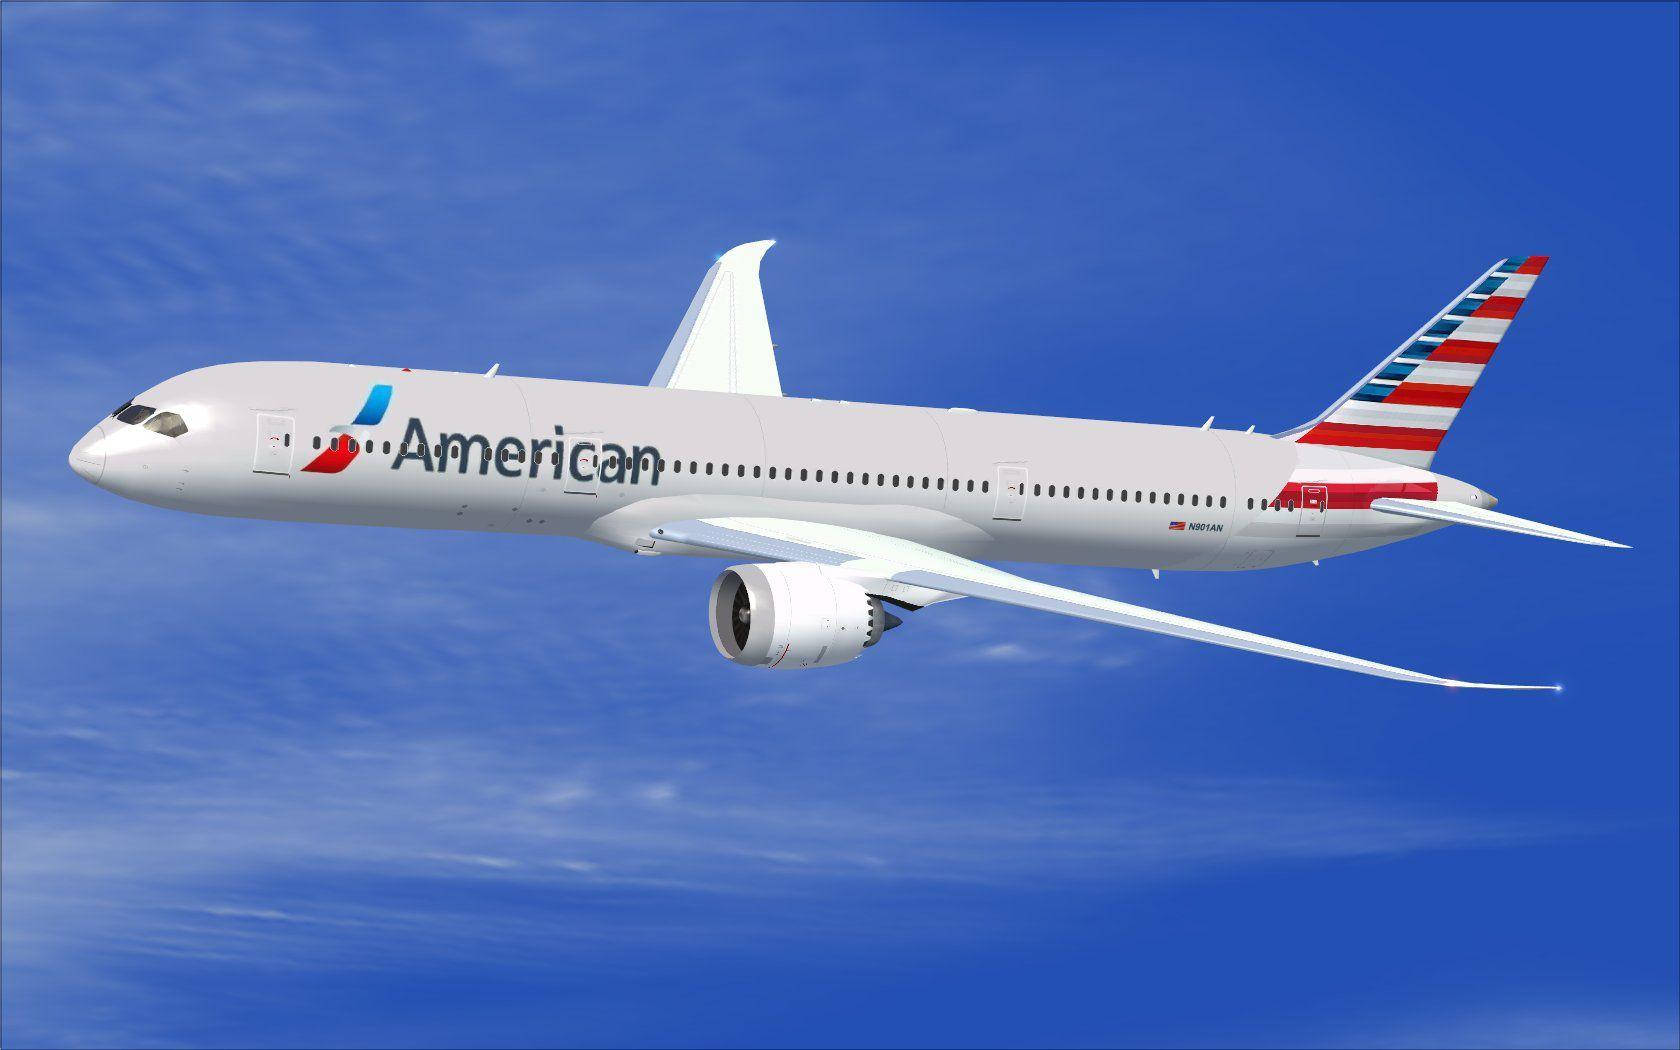 American Airlines Commercial Aircraft Wallpaper